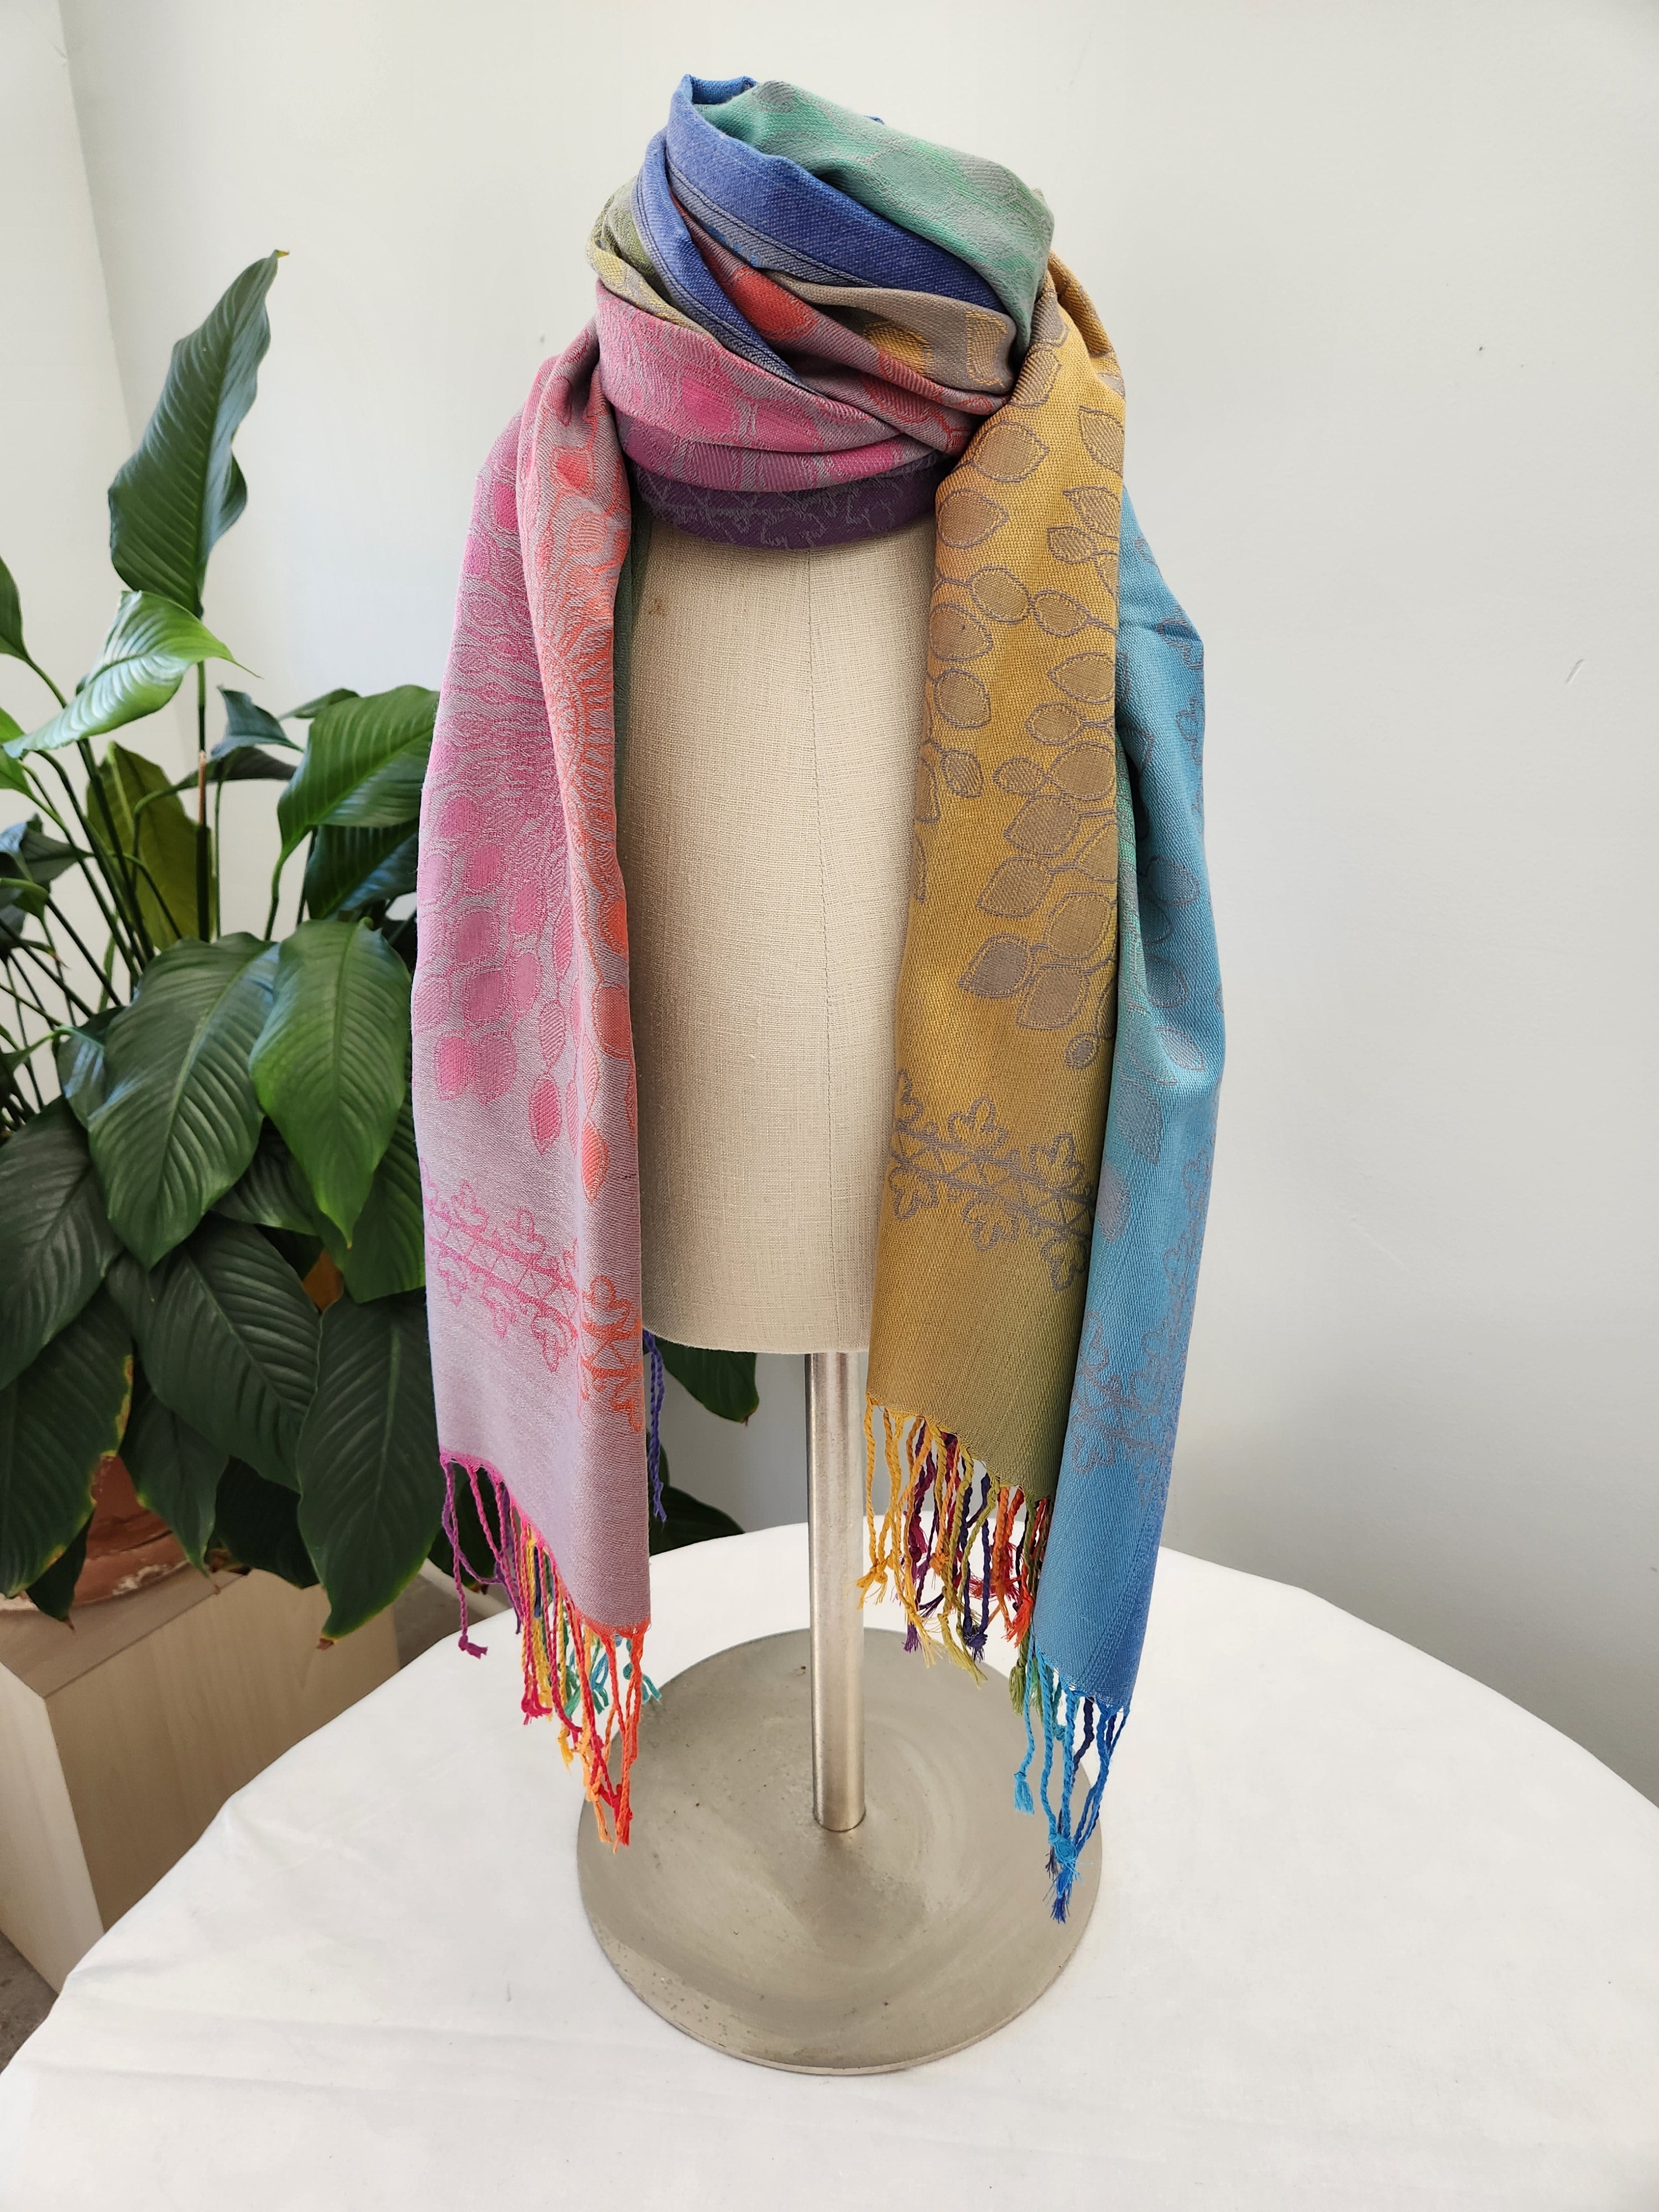 Aztec Design Shawl, Lightweight Rainbow Colors Jewel - Tones, Beach or Lake Cover Up Scarf, Oversized Scarf, Gifts for Moms and Daughter - Wear Sierra